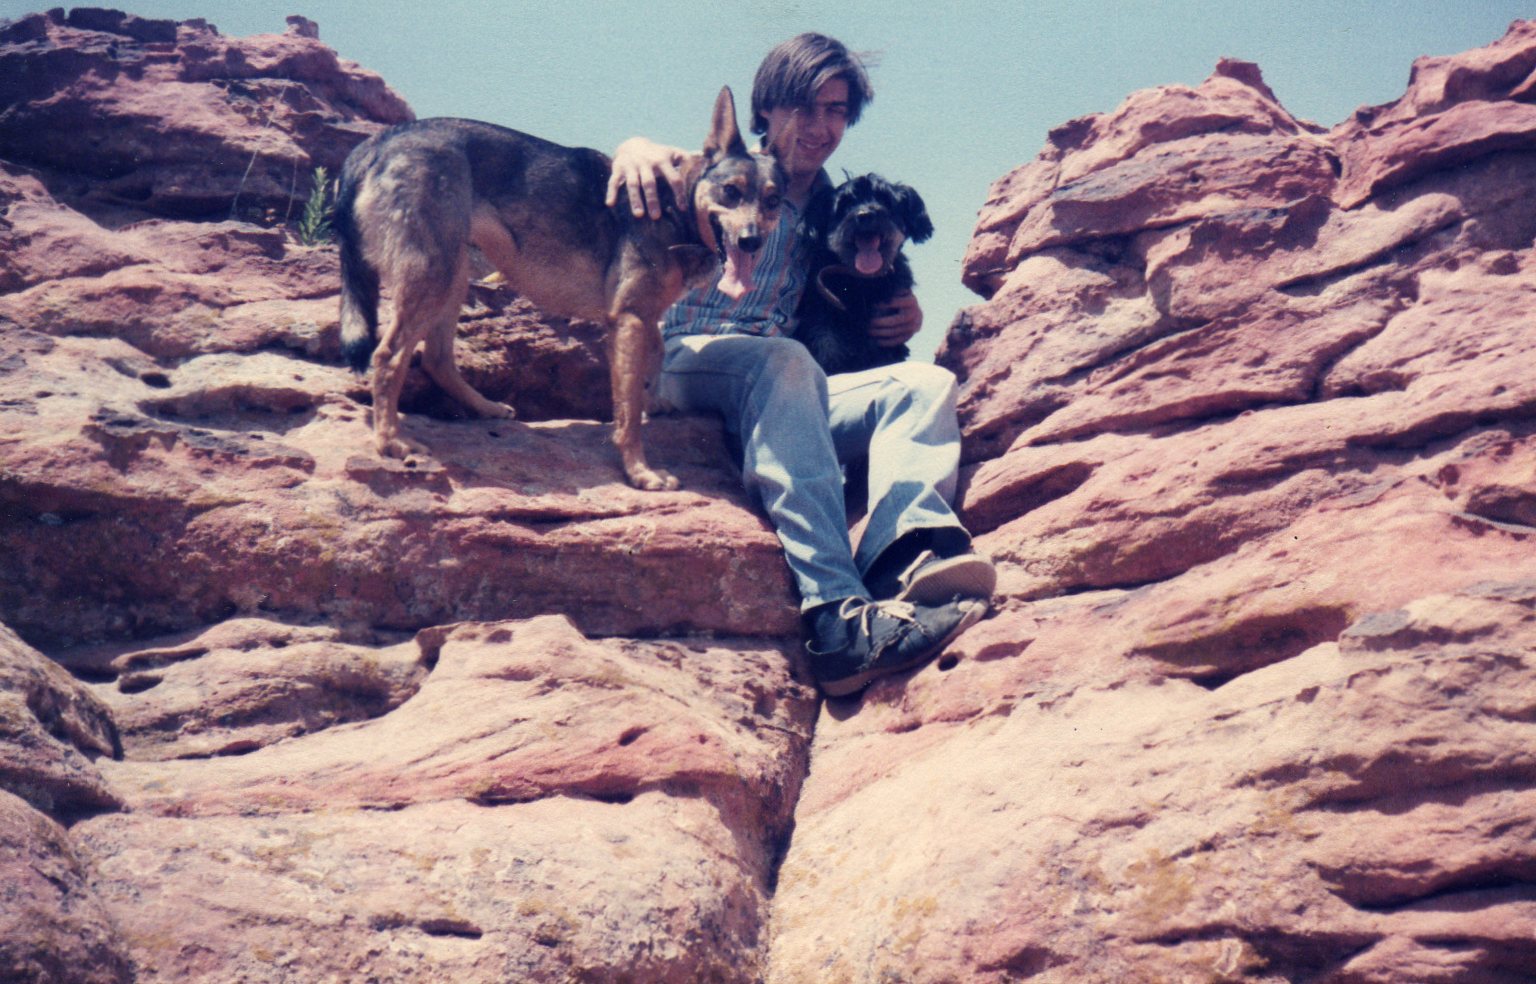 The dogs on the rocks